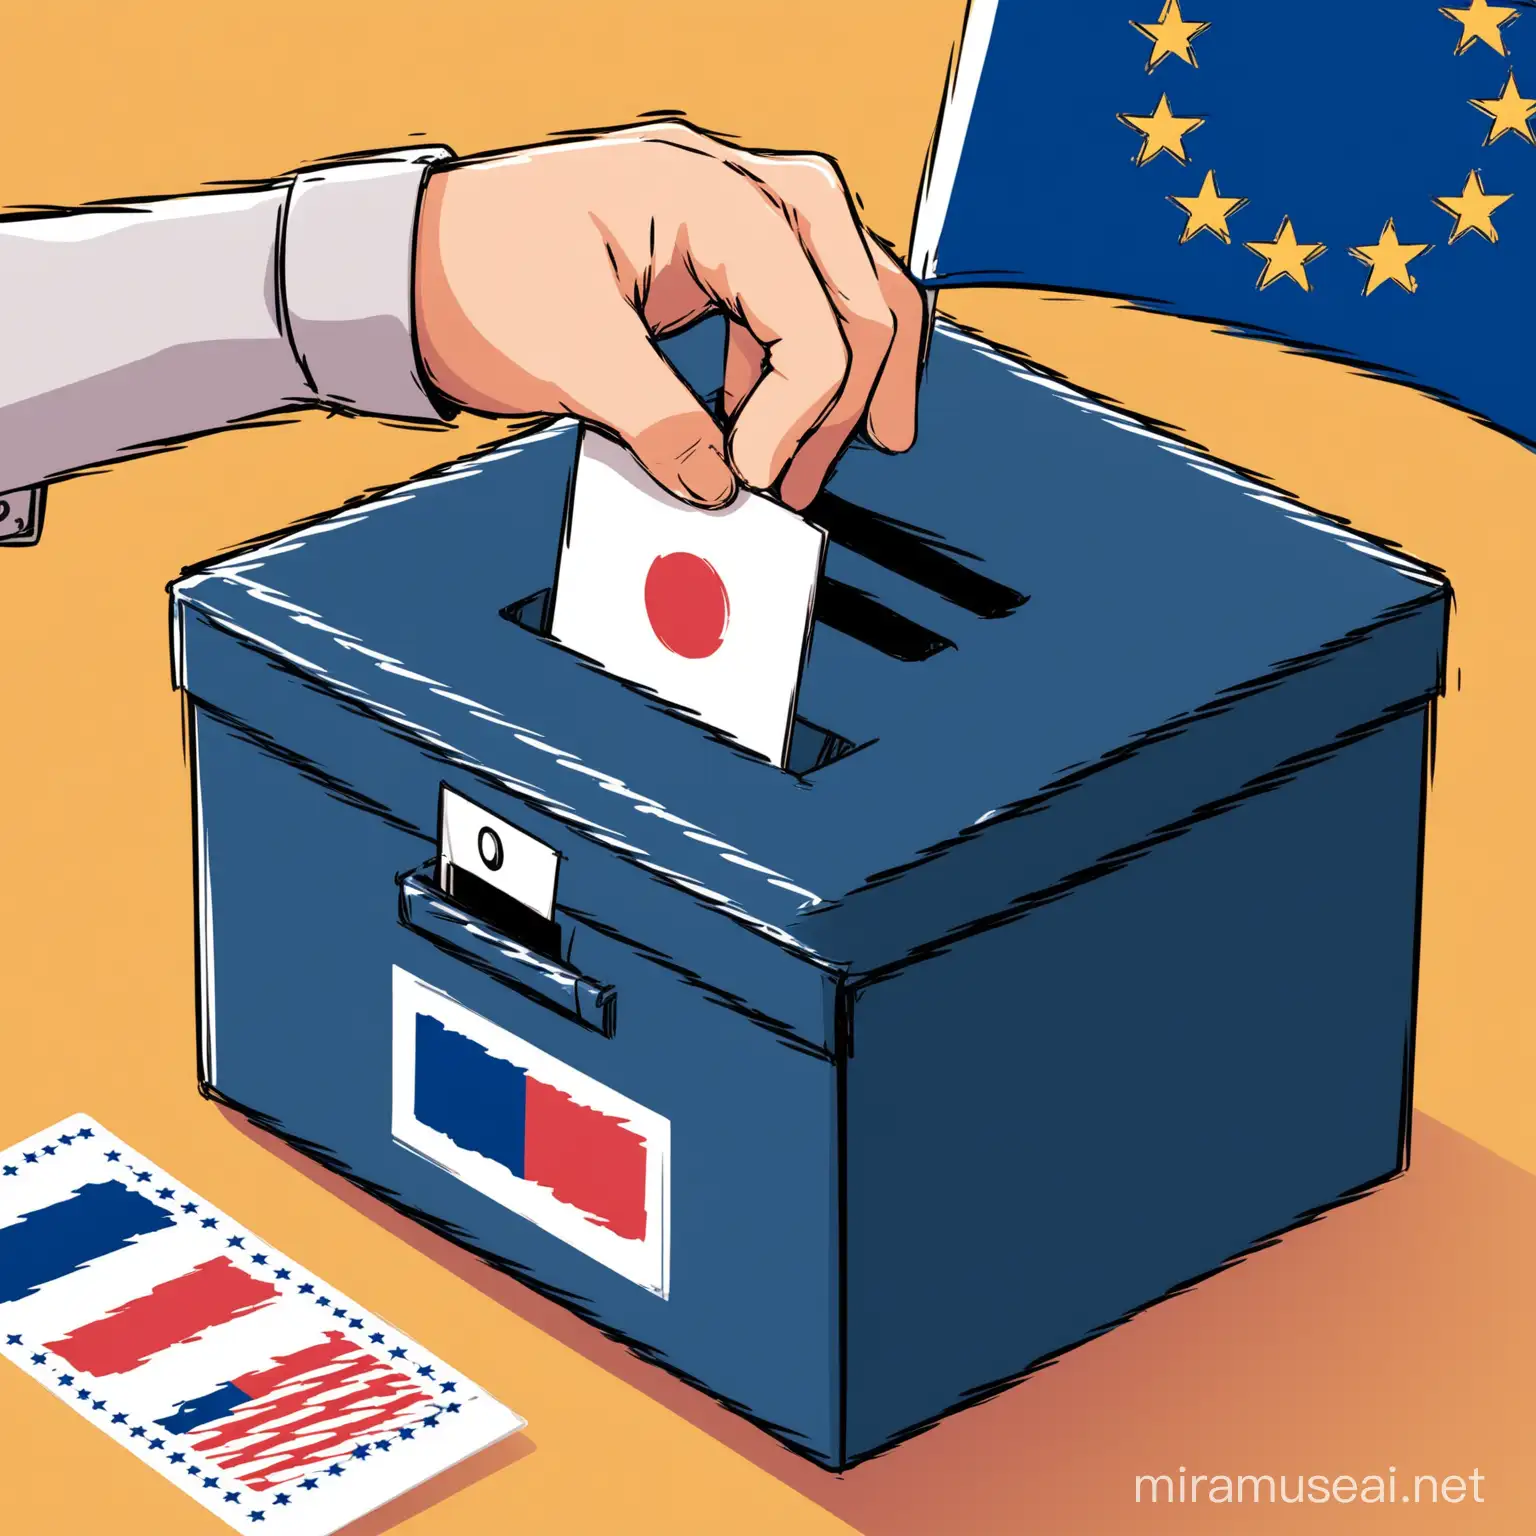 a person putting a voting card into an election box with european flag illustration style